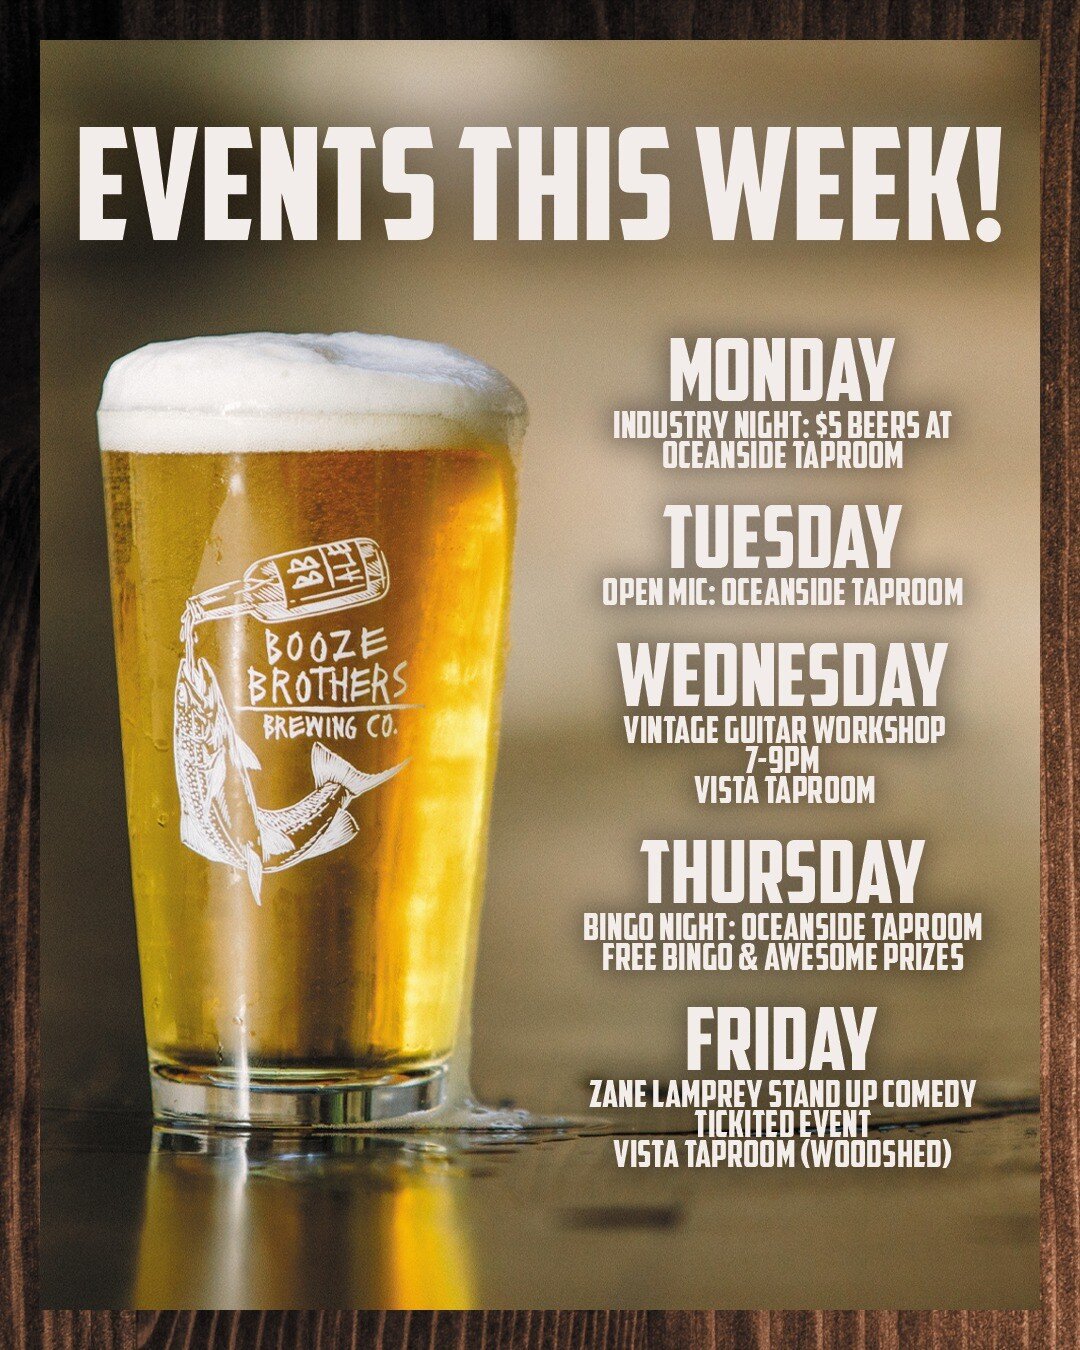 We have another awesome week of events! Here is what we have going on!

Monday (Tonight)
Industry Night at the Oceanside Taproom
$5 beers all night long &amp; sushi and food specials from @rosewoodoceanside

Tuesday
Open Mic Night at the Oceanside Ta